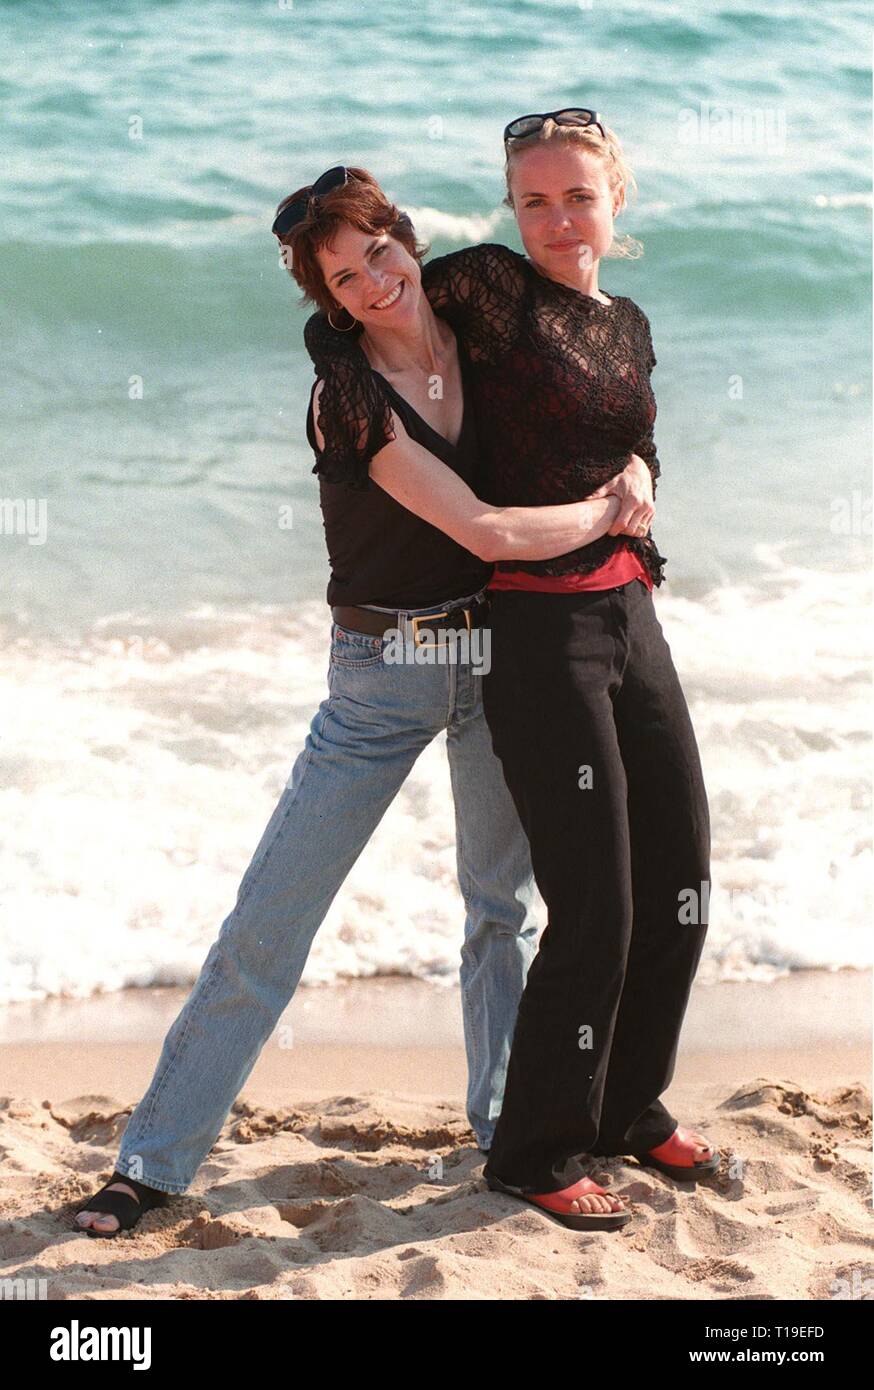 CANNES, FRANCE - May 20, 1998: Actresses ALLY SHEEDY (right) & RADHA  MITCHELL at the Cannes Film Festival to promote their new movie "High Art  Stock Photo - Alamy